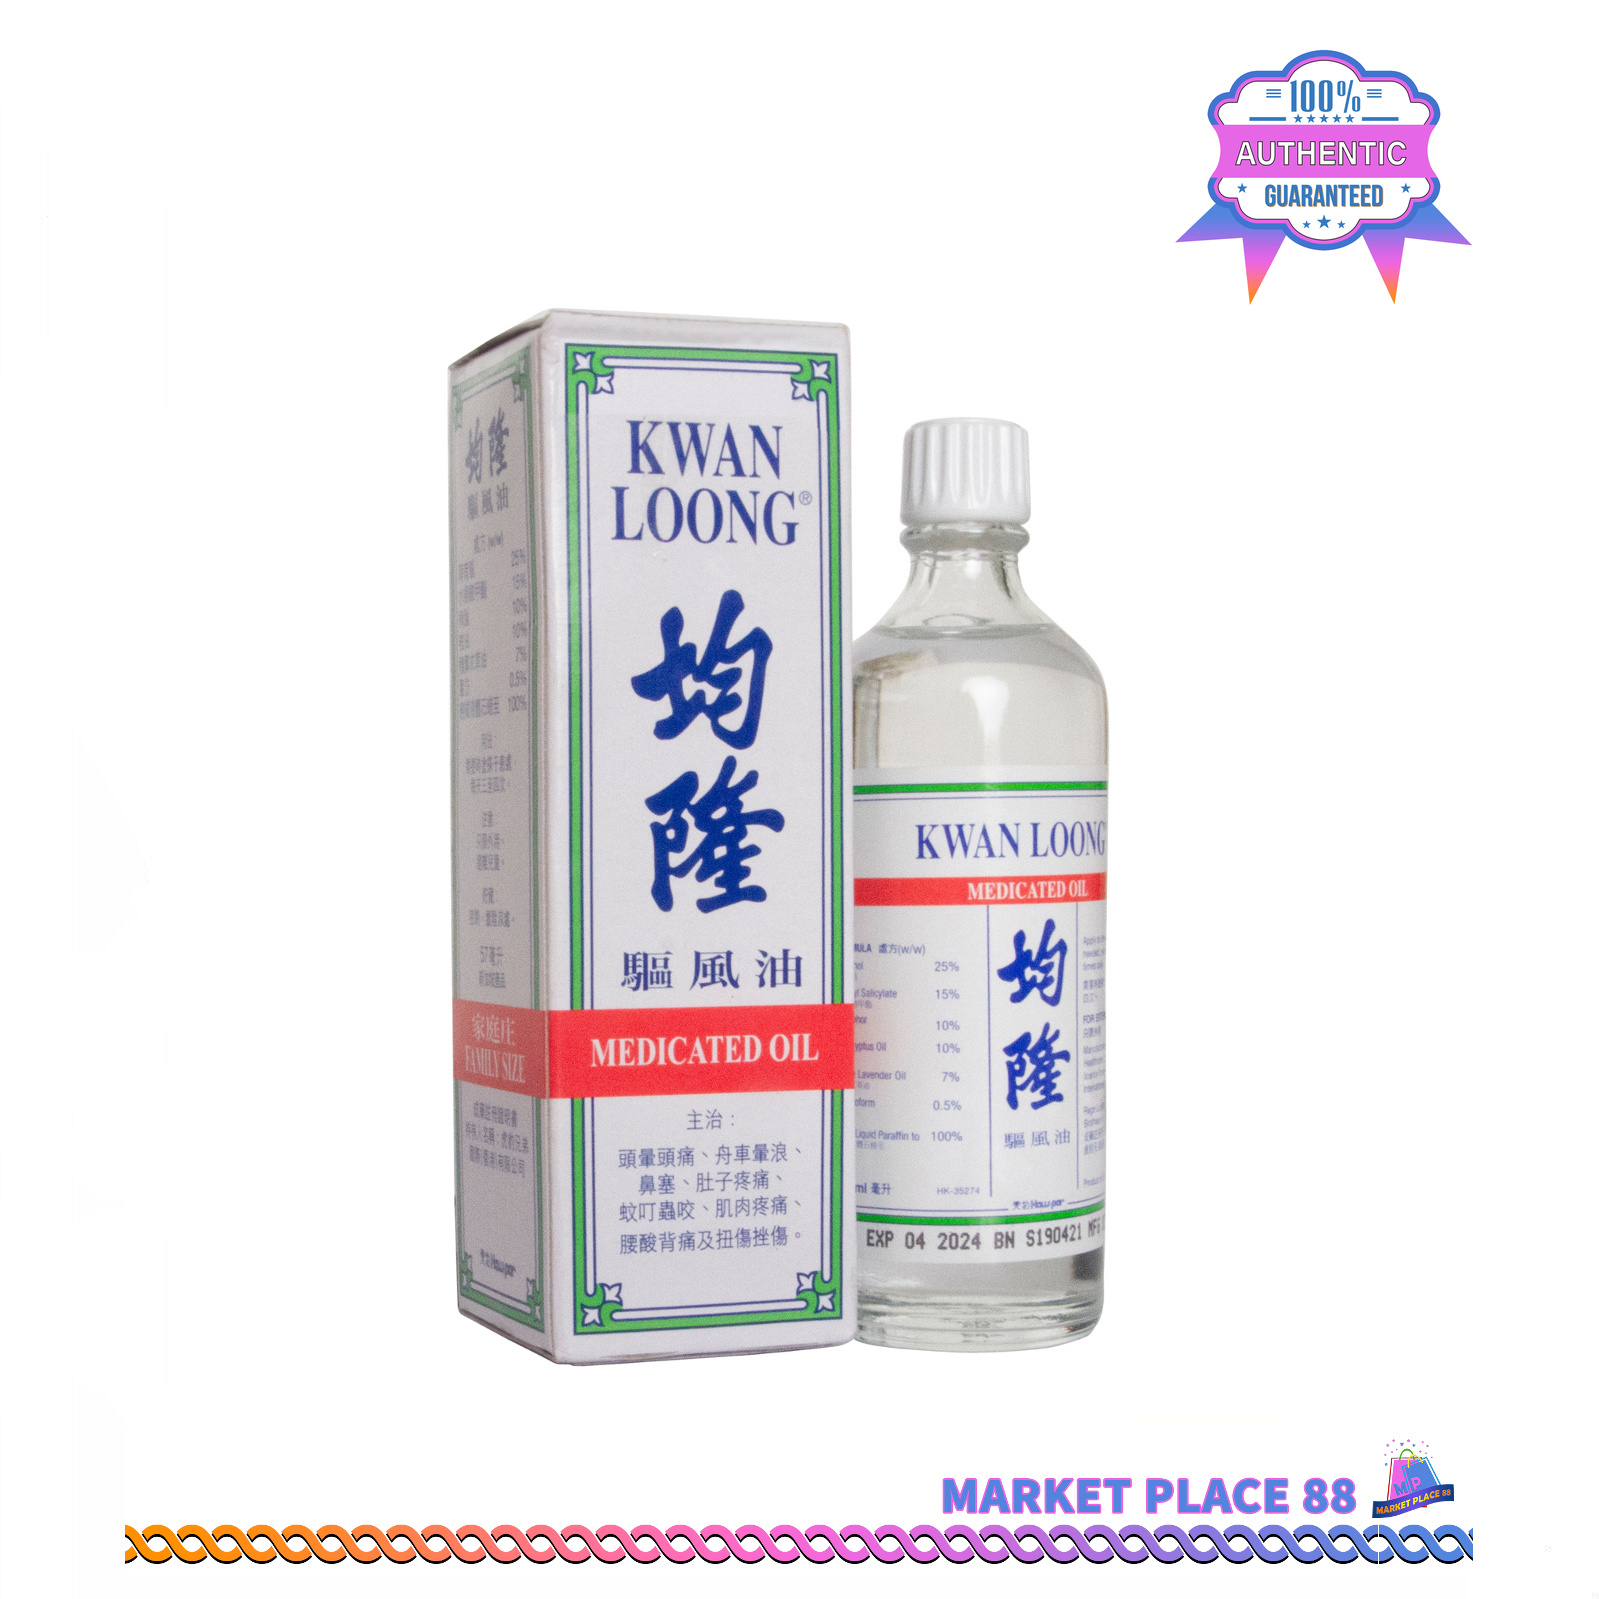 KWAN LOONG MEDICATED OIL 57ML - Asian Grocer